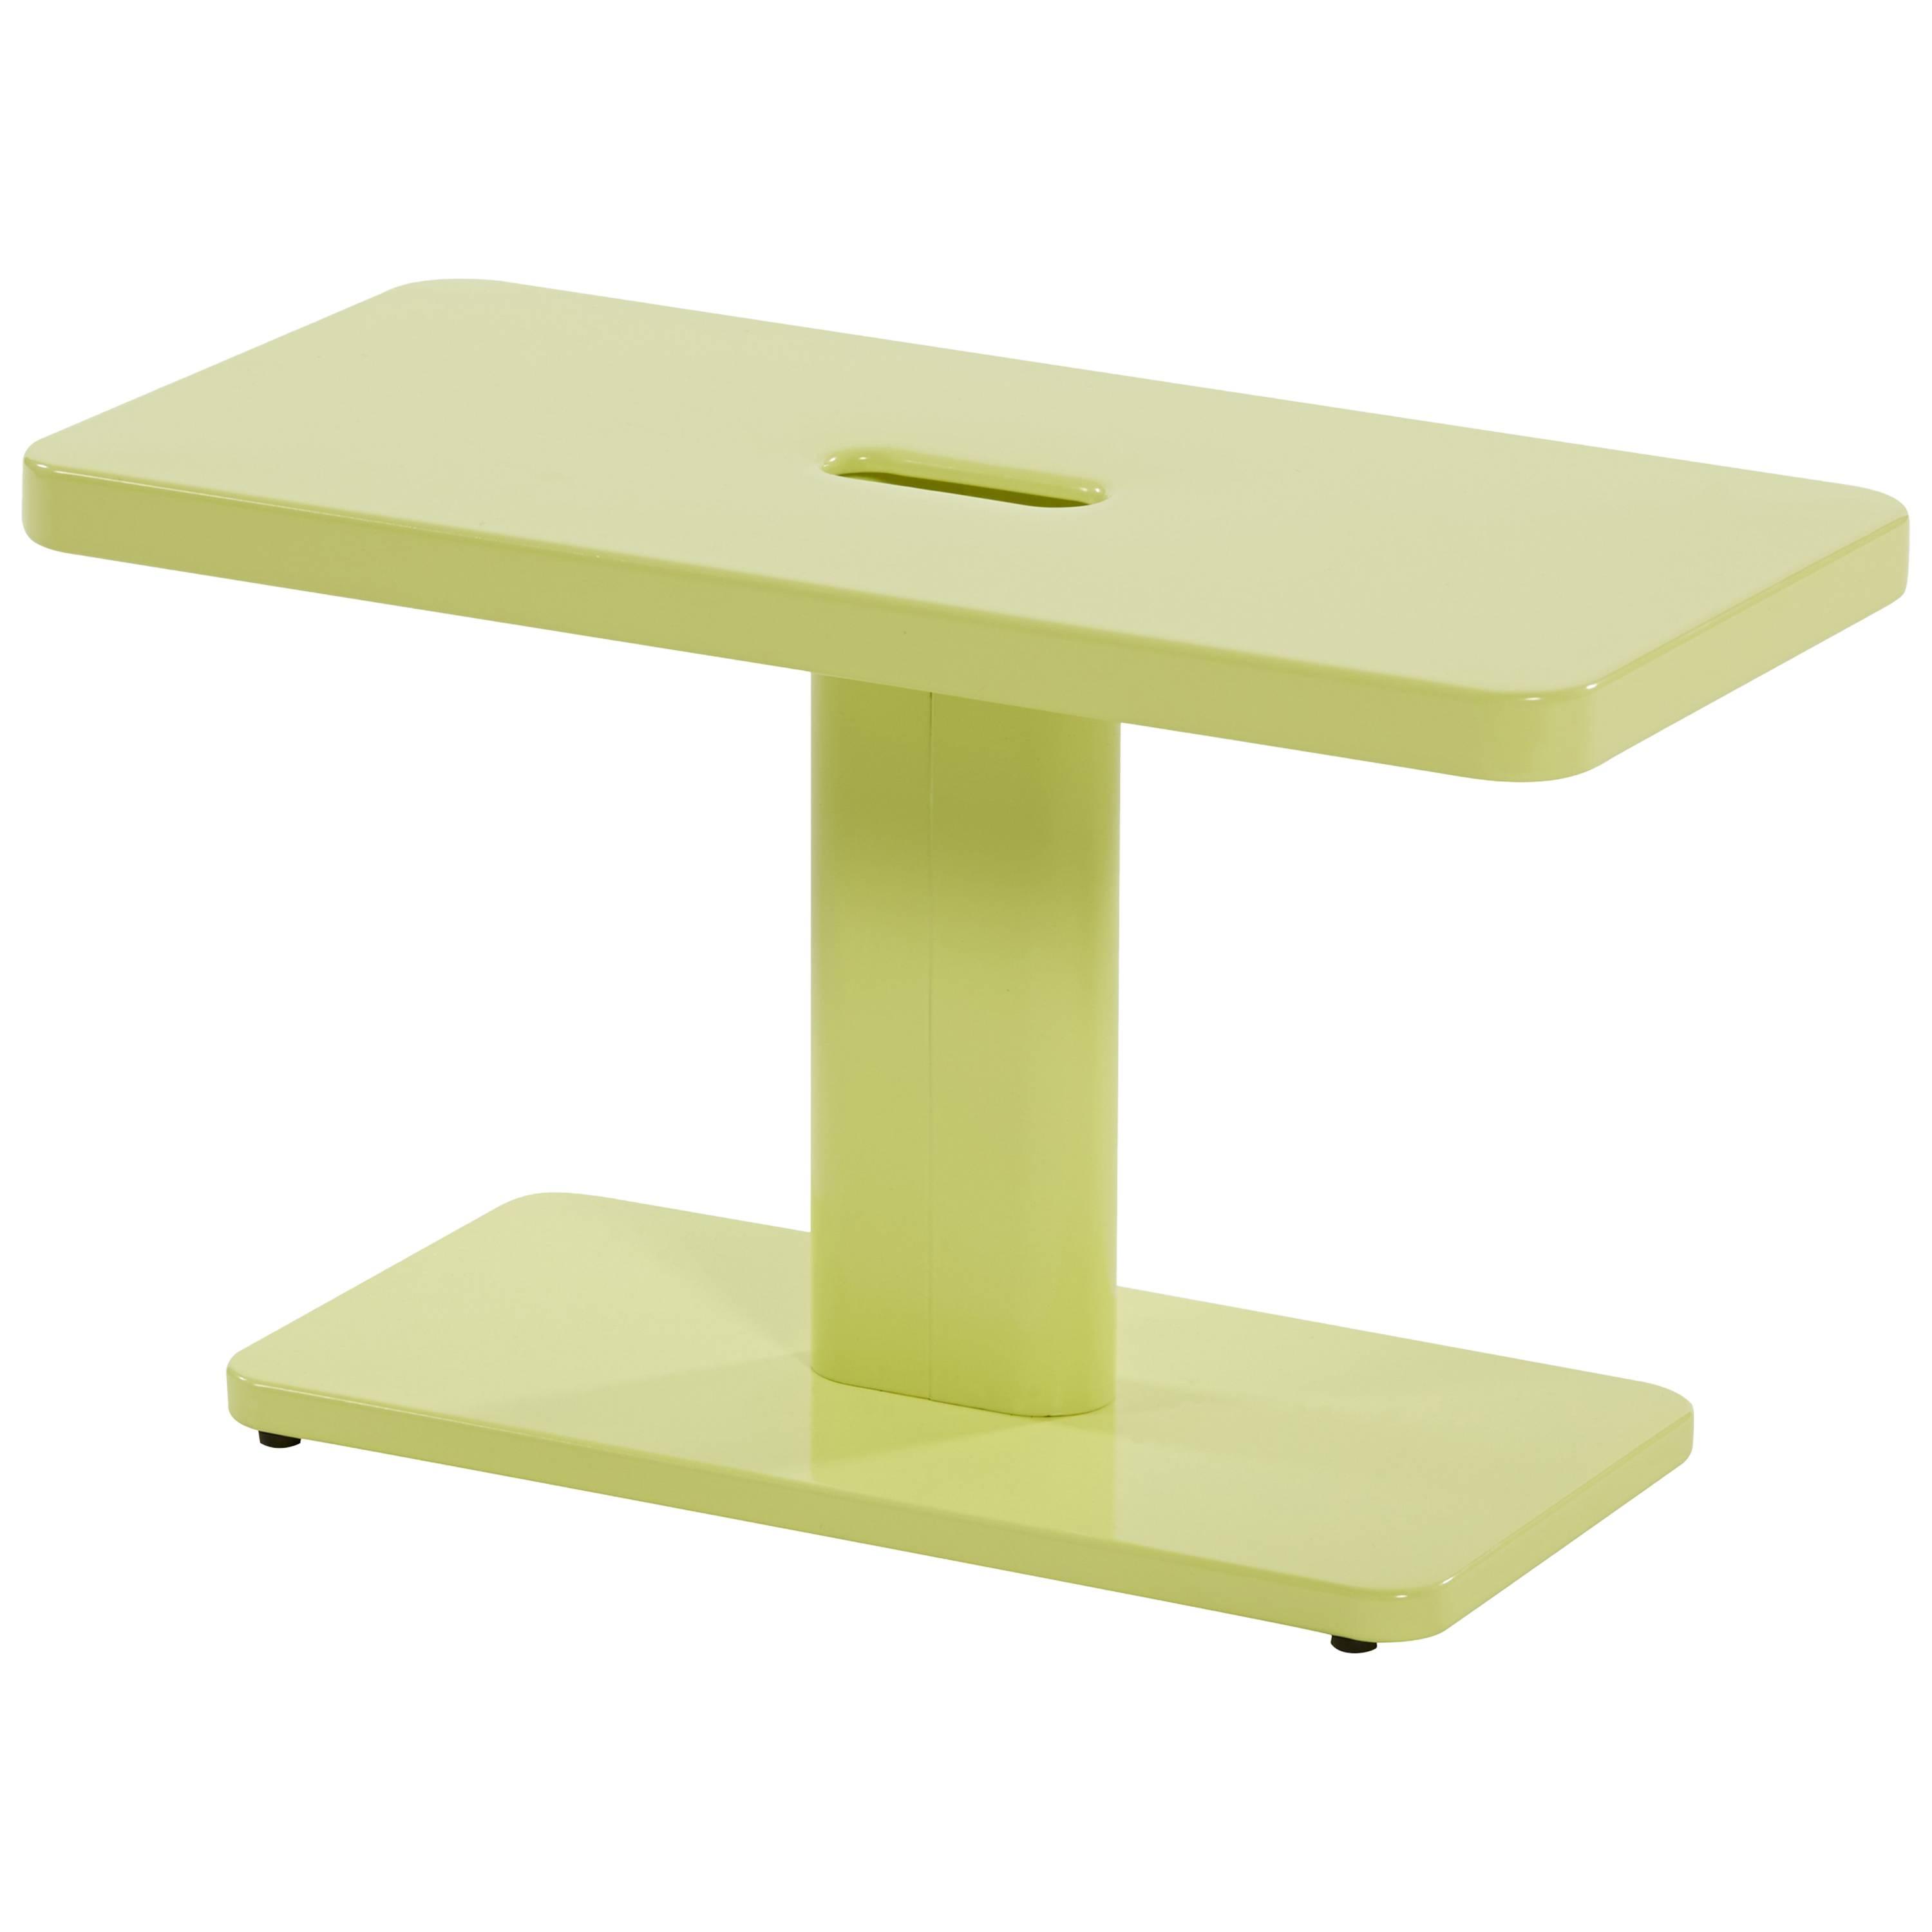 azur outdoor side table pastel yellow frederic gaunet and master tolix for piece dining set glass end tables long thin beautiful headboards round with leaf teal wall clock pier